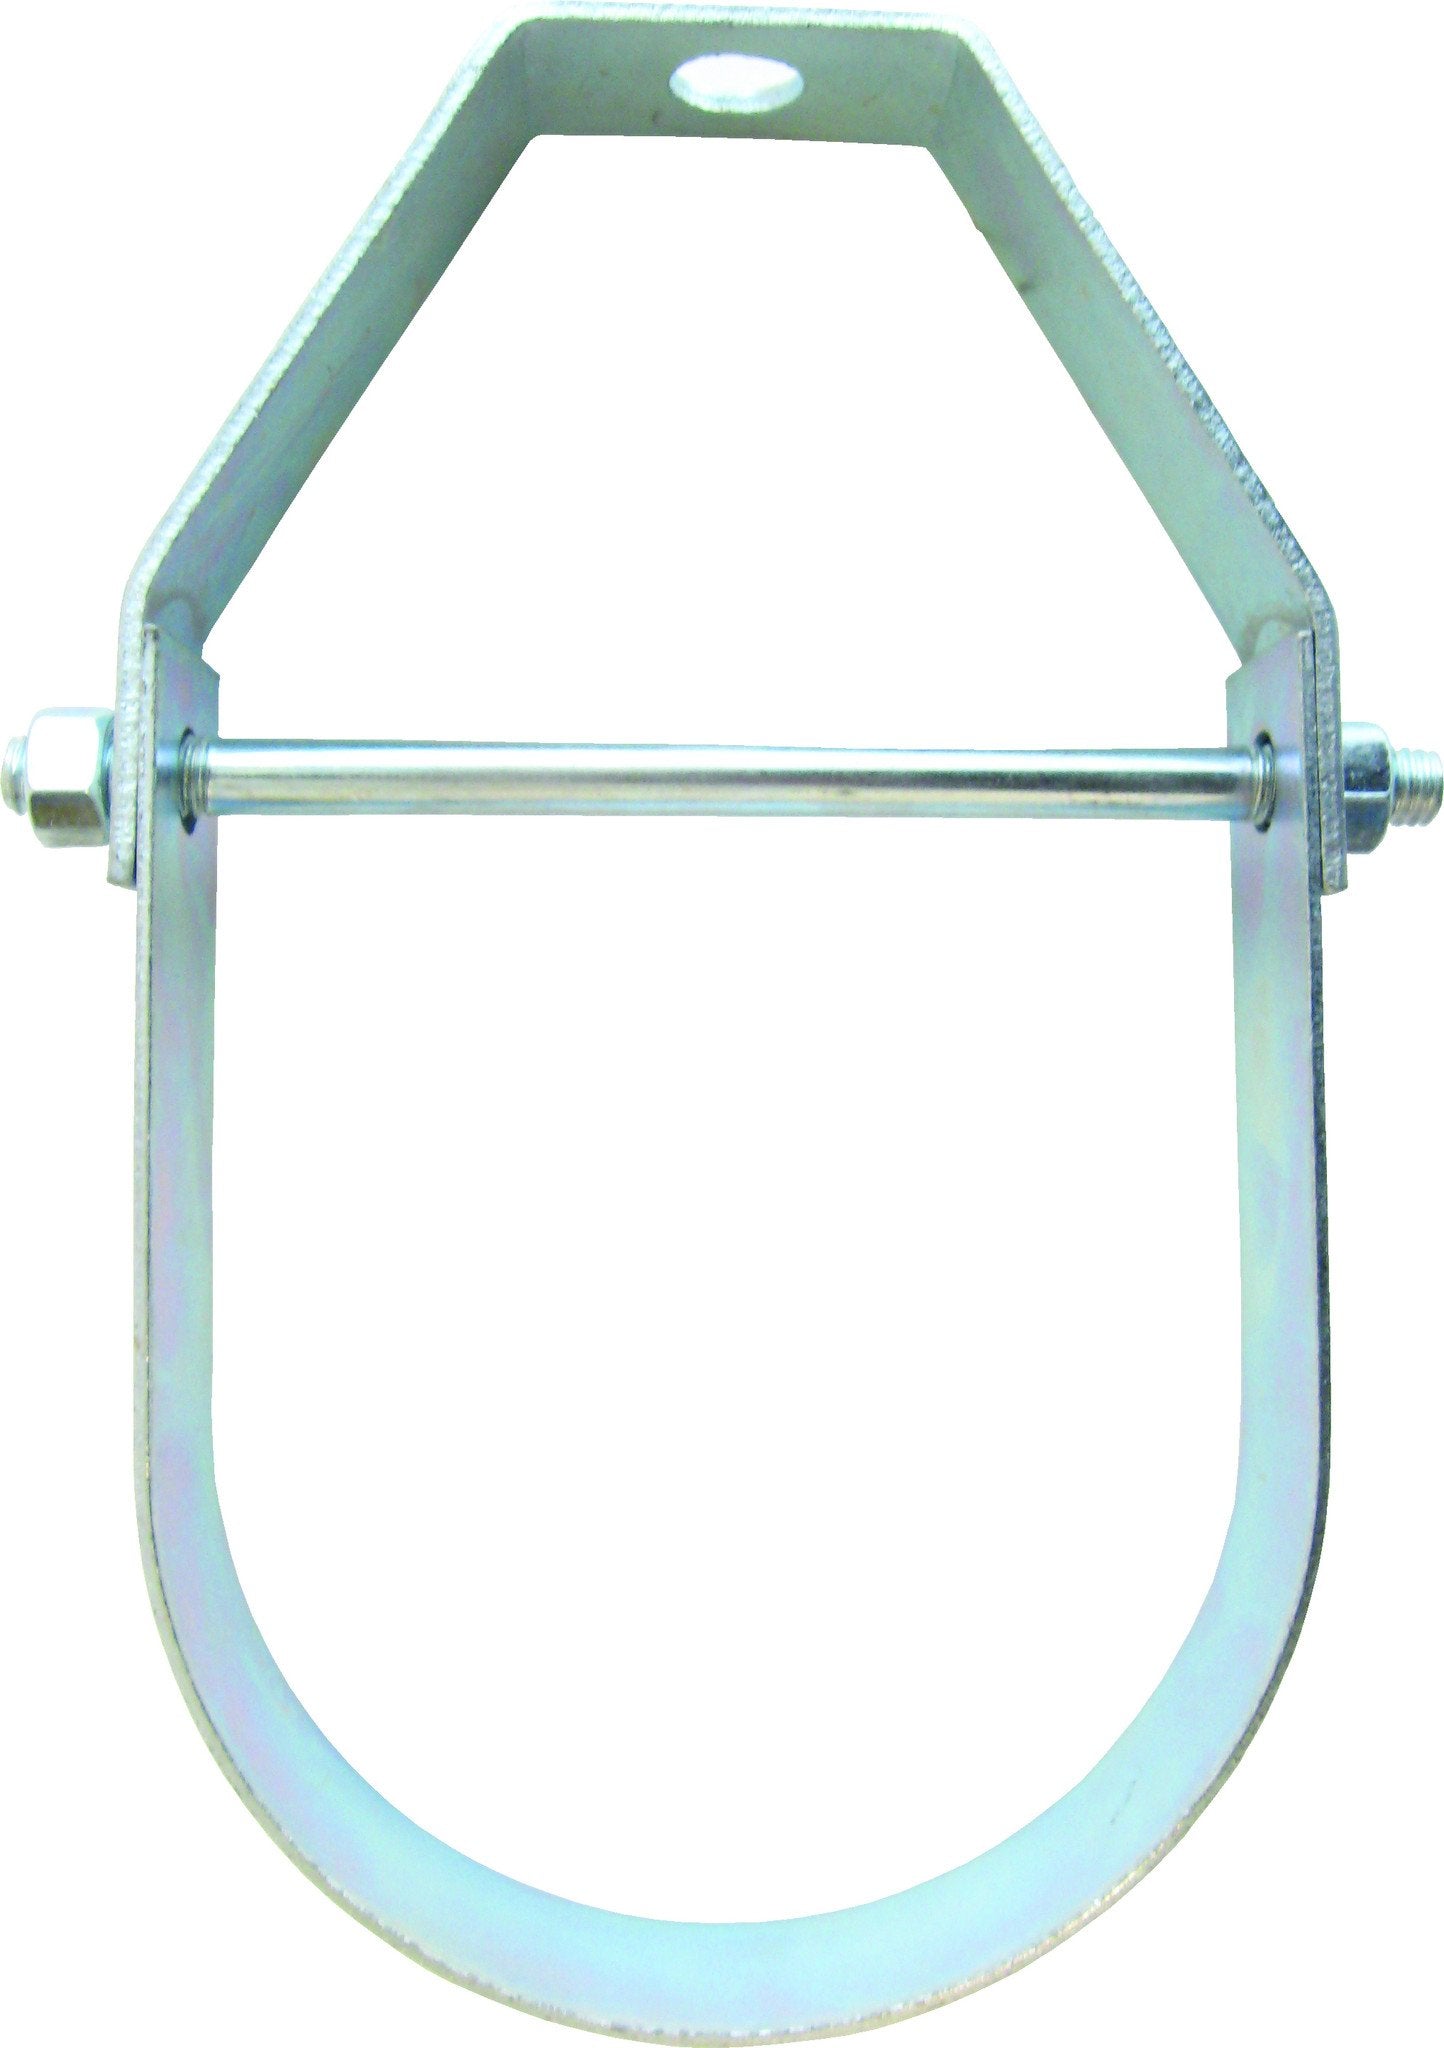 Standard Electro Plated Clevis Hangers | 1/2" to 4" IPS Fittings and Valves - Cleanflow